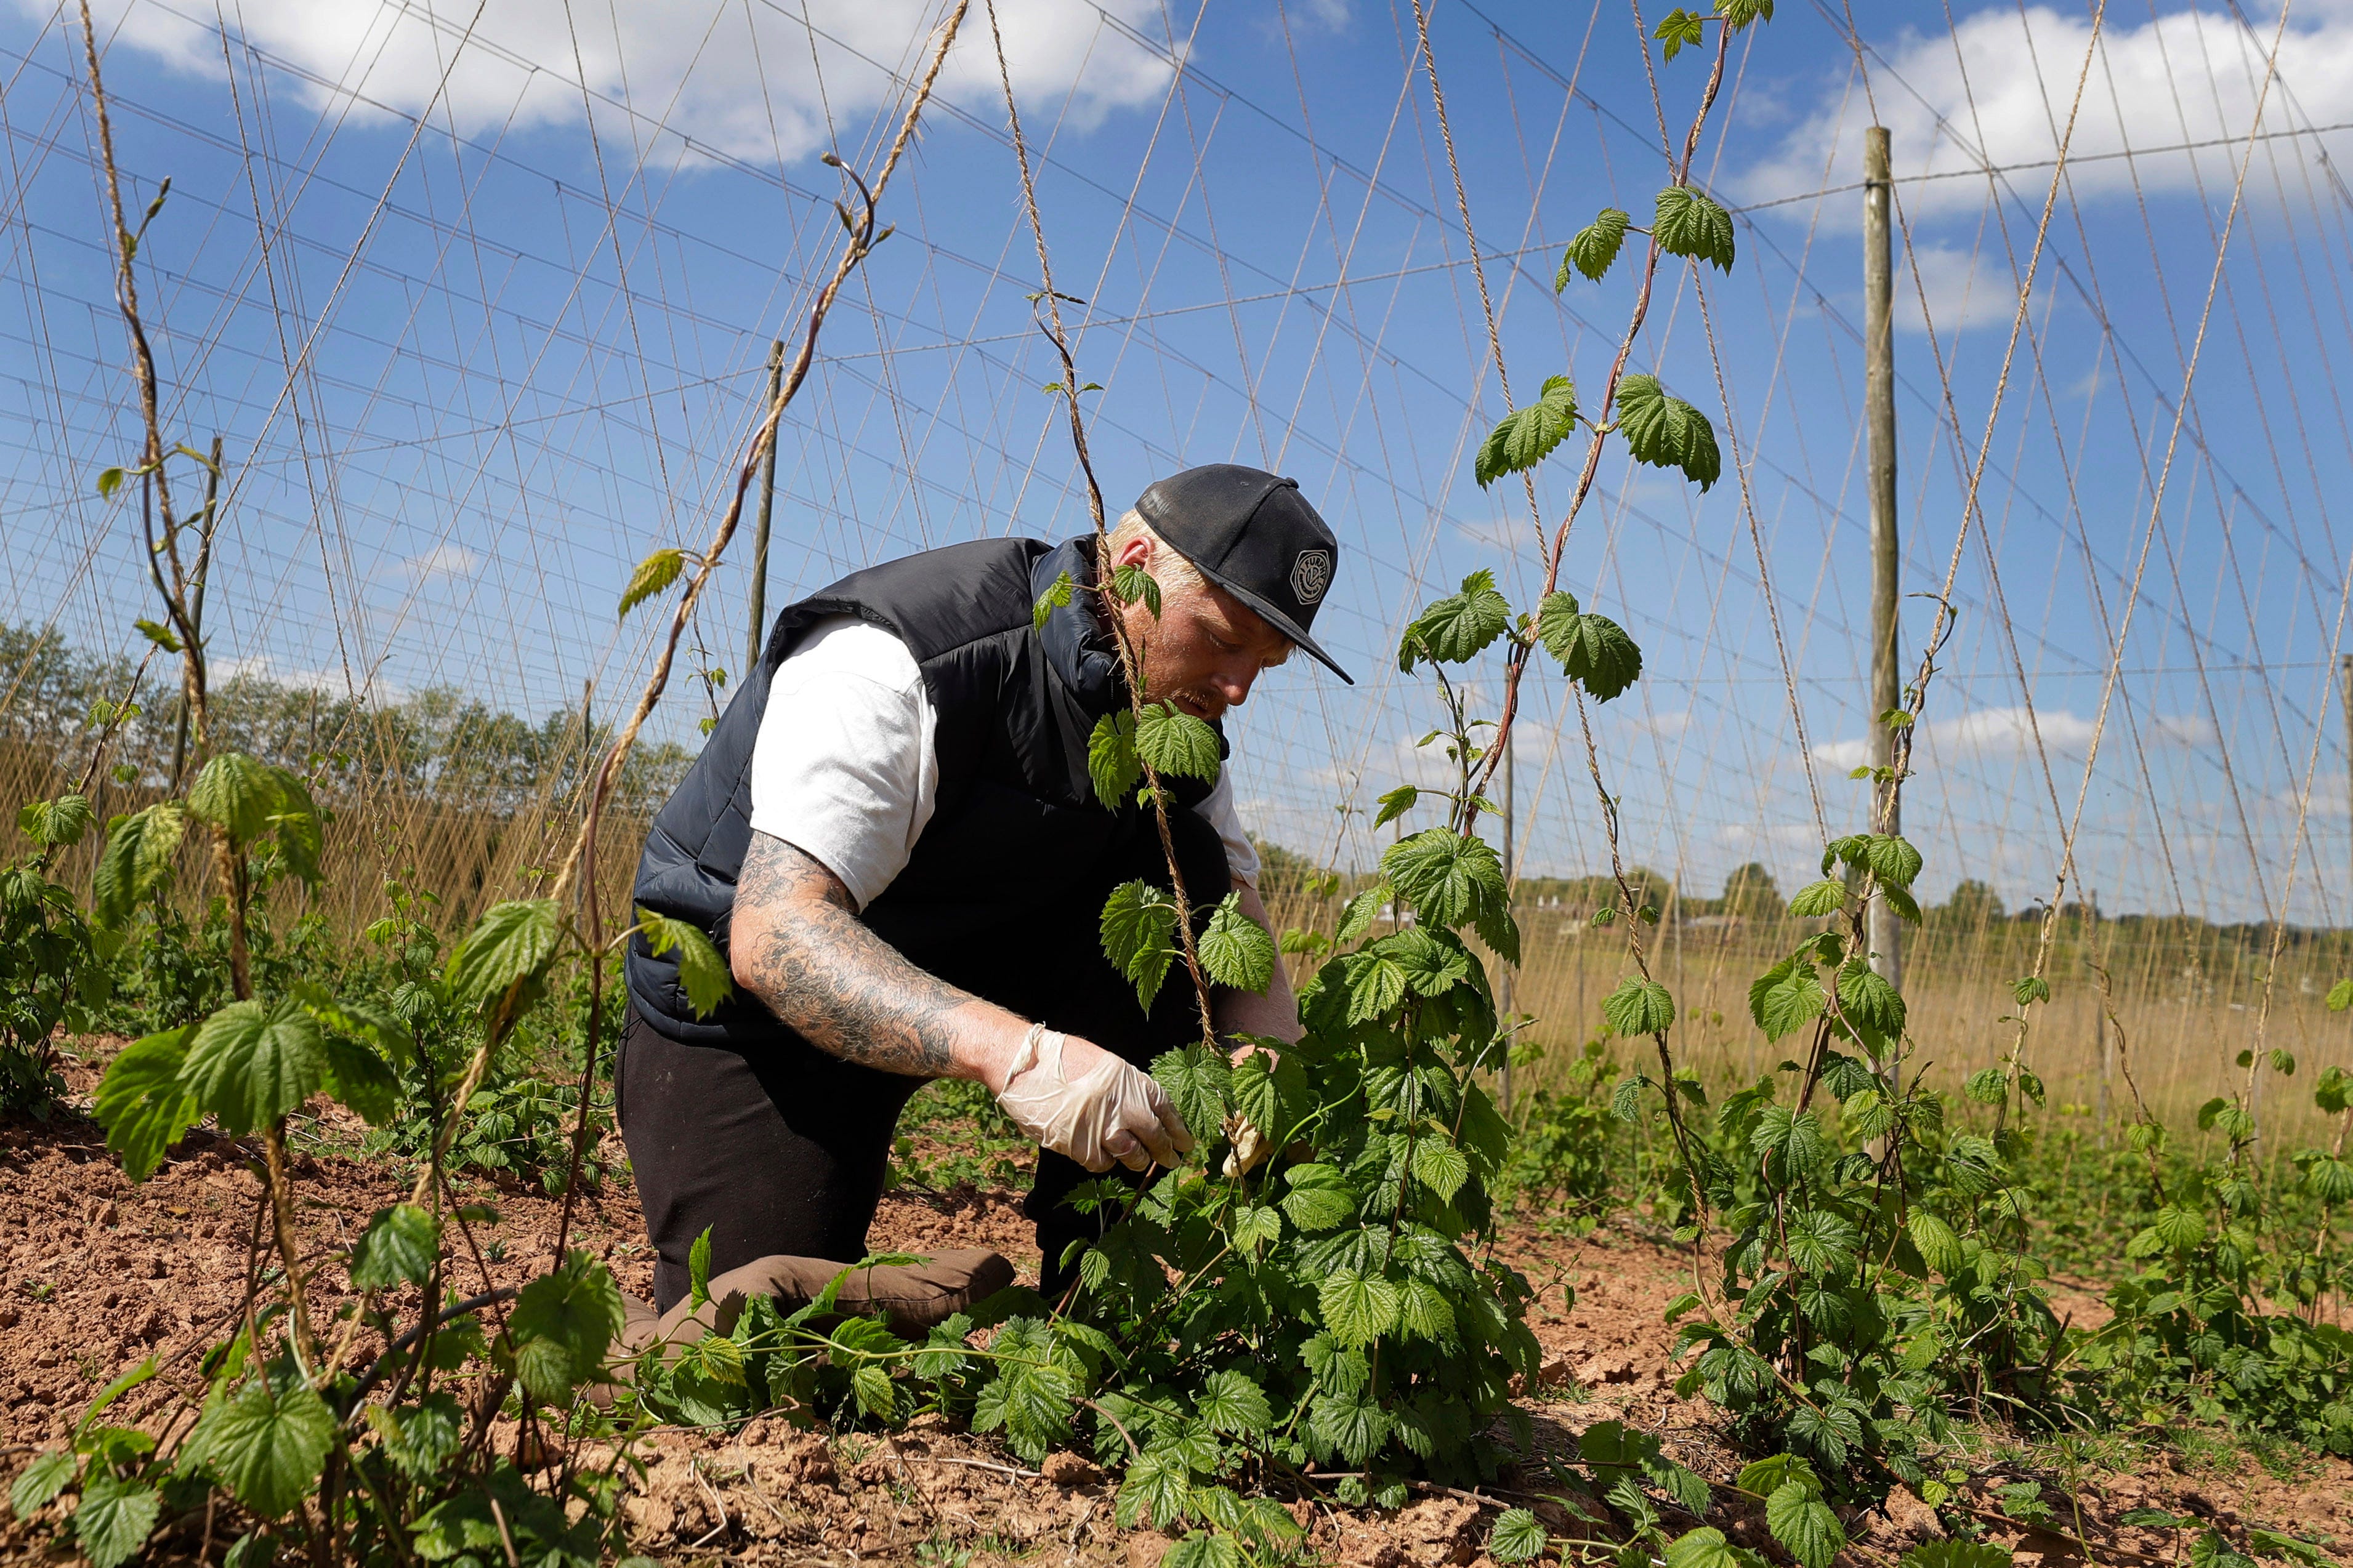 Seasonal worker James Wodyatt trains the growing hops by winding or tying two or three shoots clockwise to each string, at Stocks Farm in Suckley, Worcestershire. Britain's fruit and vegetable farmers have long worried that the exit from the European Union would keep out the tens of thousands of Eastern European workers who come every year to pick the country's produce.